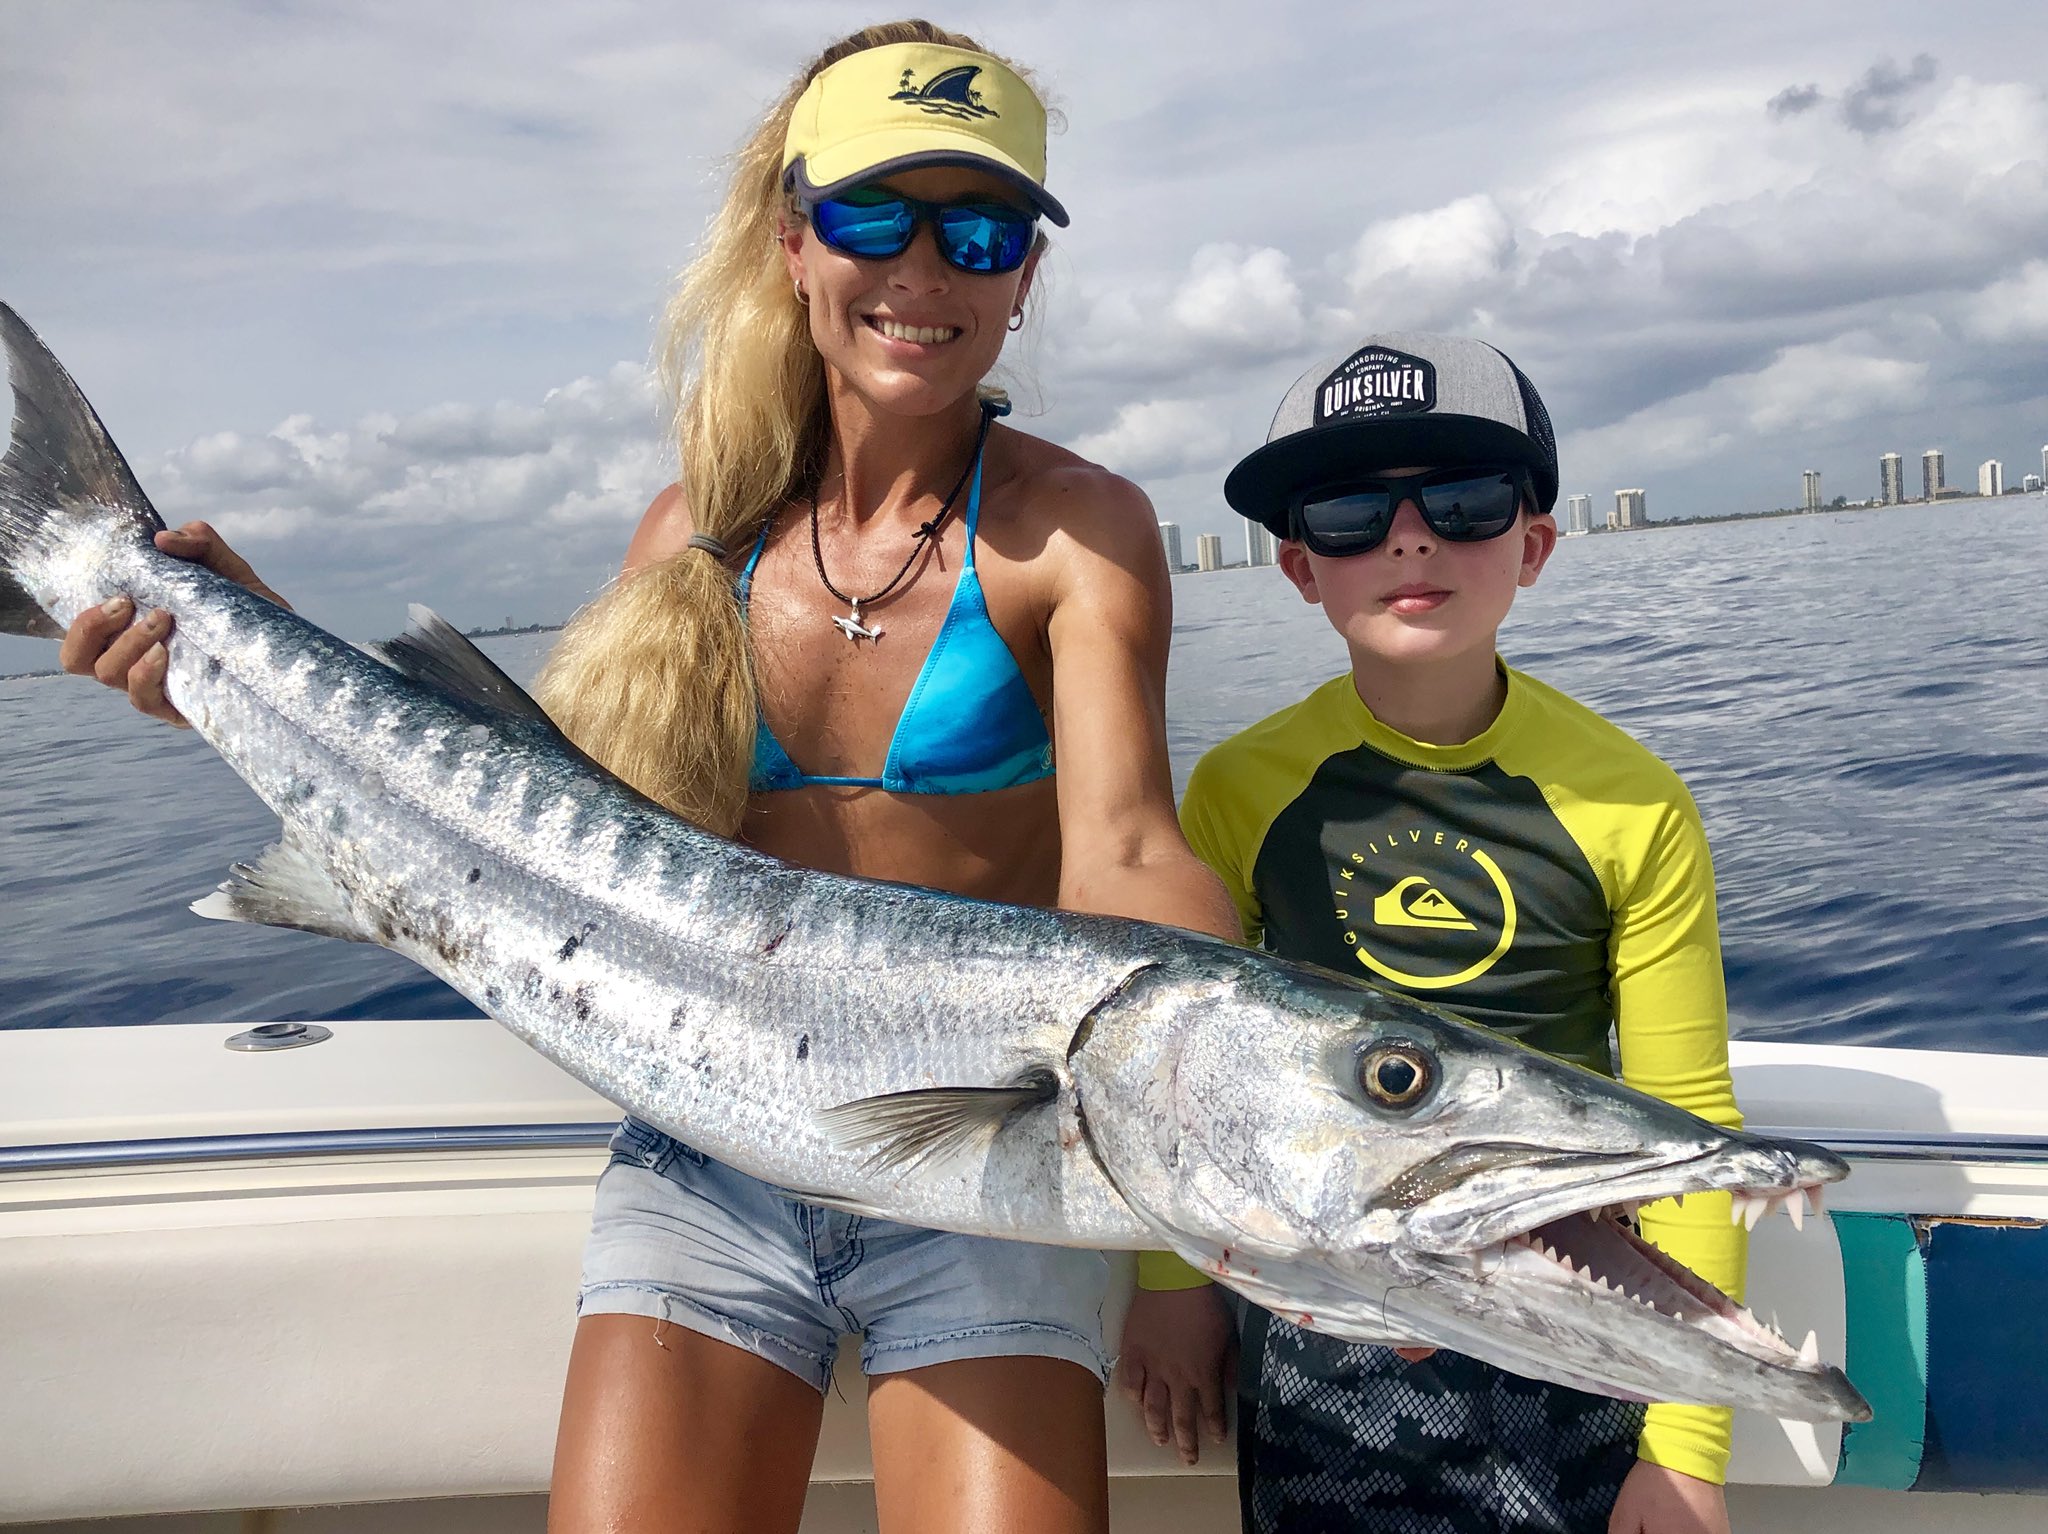 Darcizzle Offshore TV on Twitter.